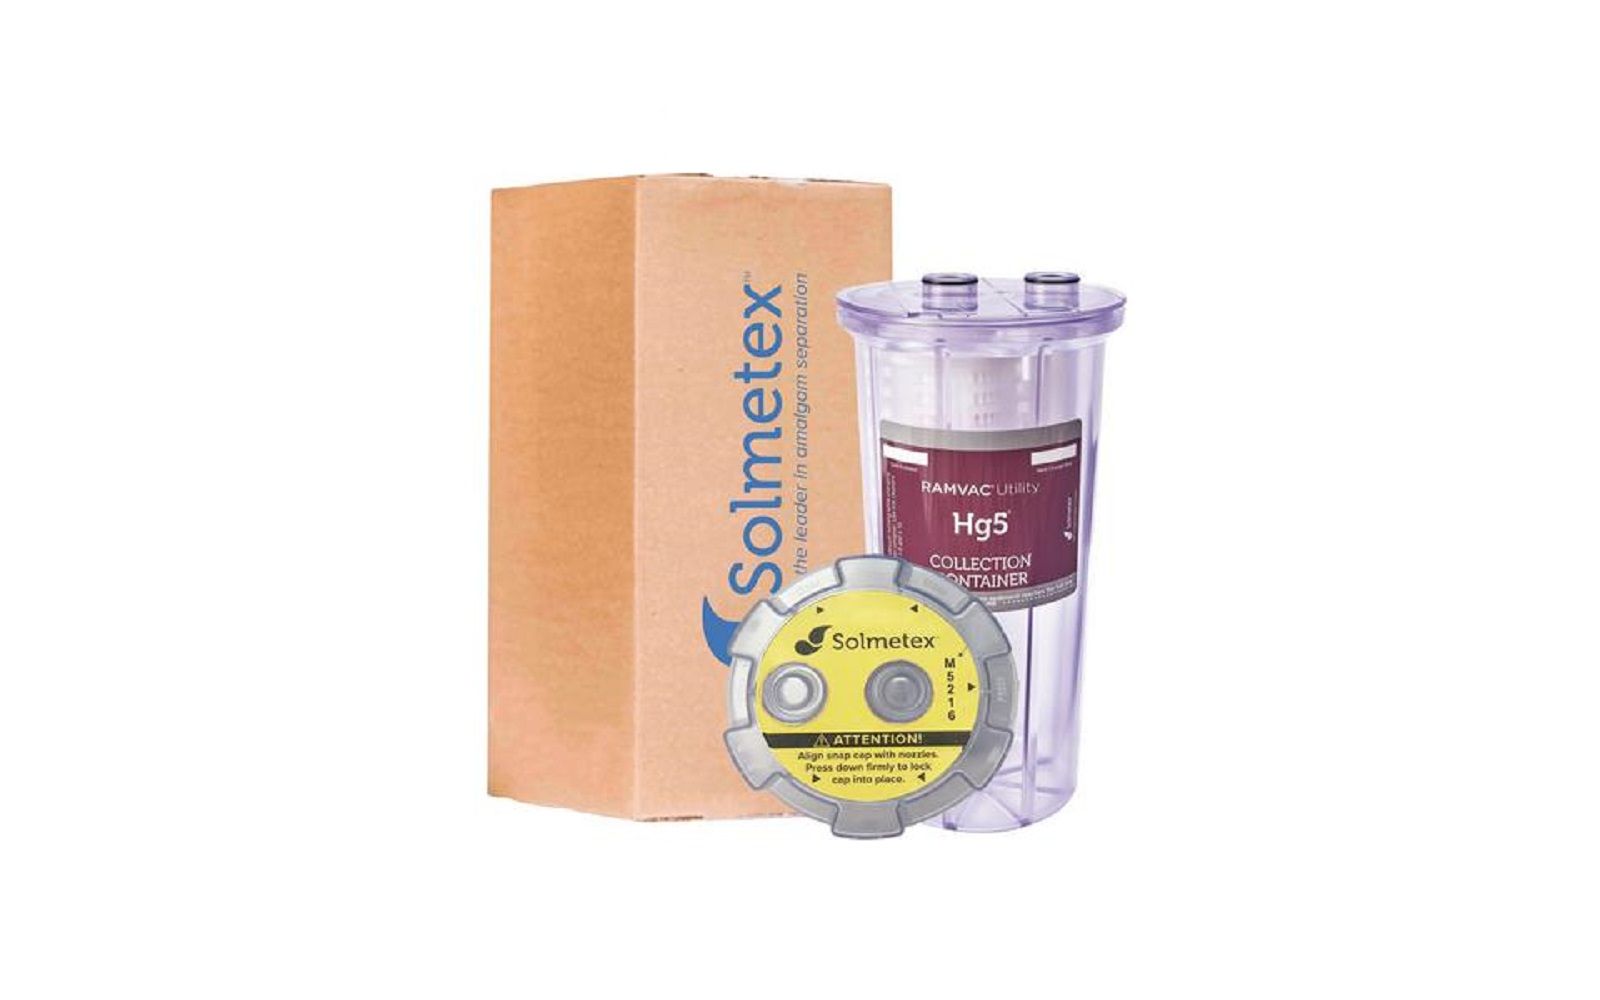 Ramvac utility hg5® collection container with recycle kit - for the ramvac utility hg5® amalgam separator only